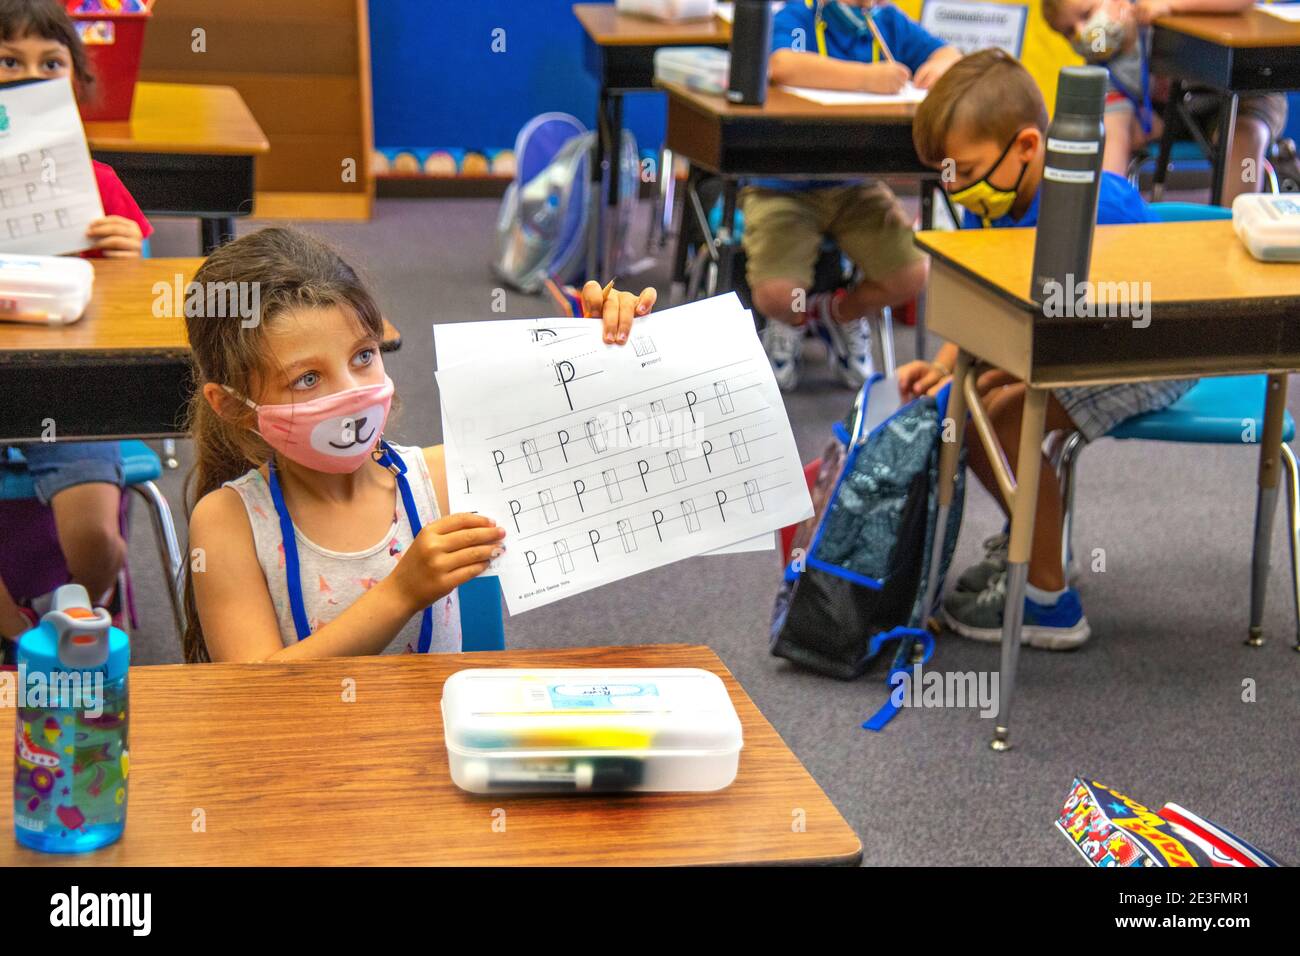 A first grader at a California elementary school displays her paper to show she understands the letter P. NoteHispanic mask due to coronavirus pandemi Stock Photo